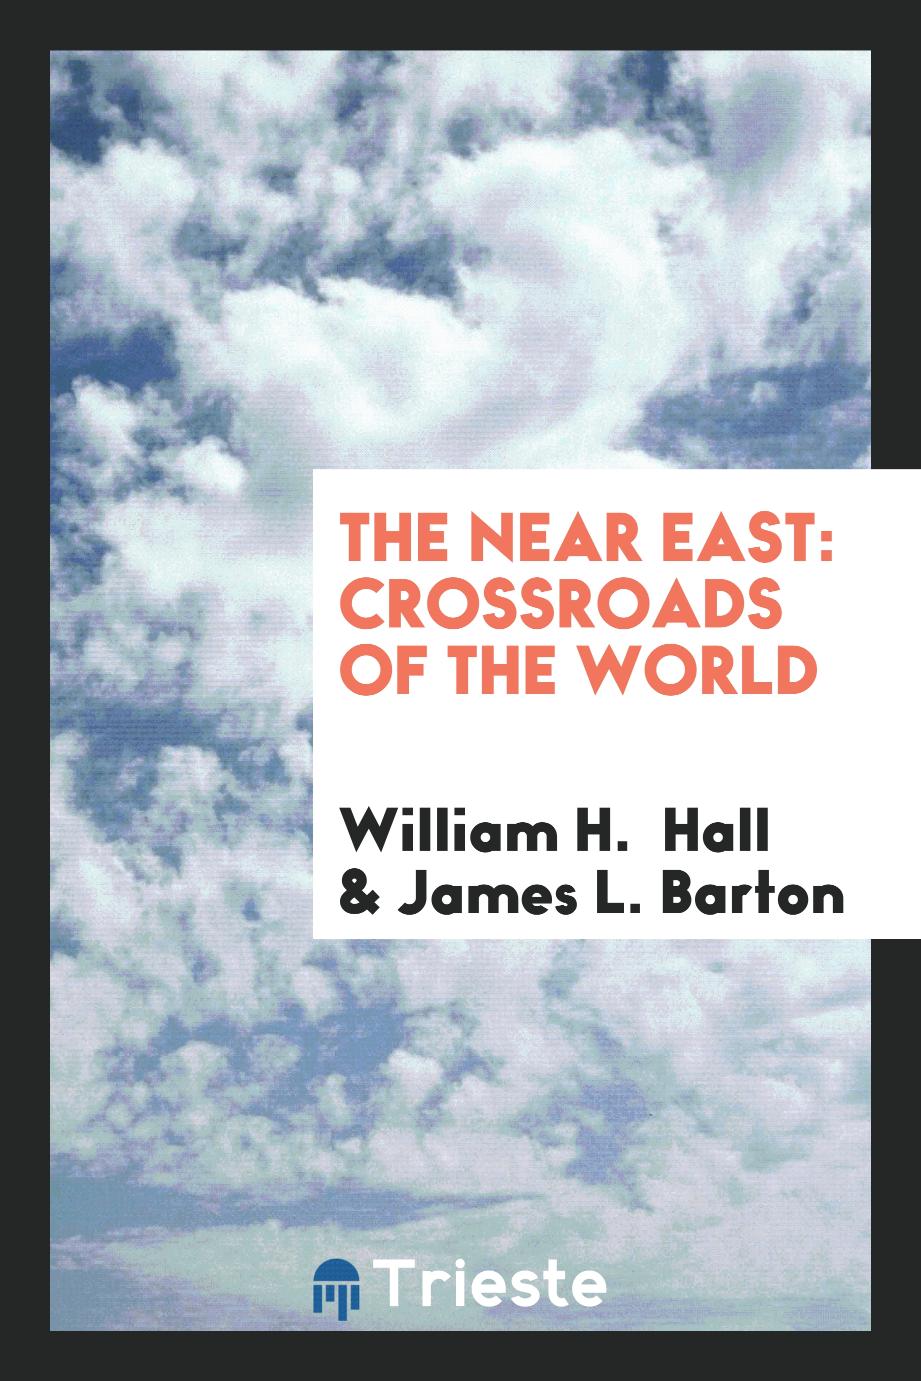 The Near East: Crossroads of the World